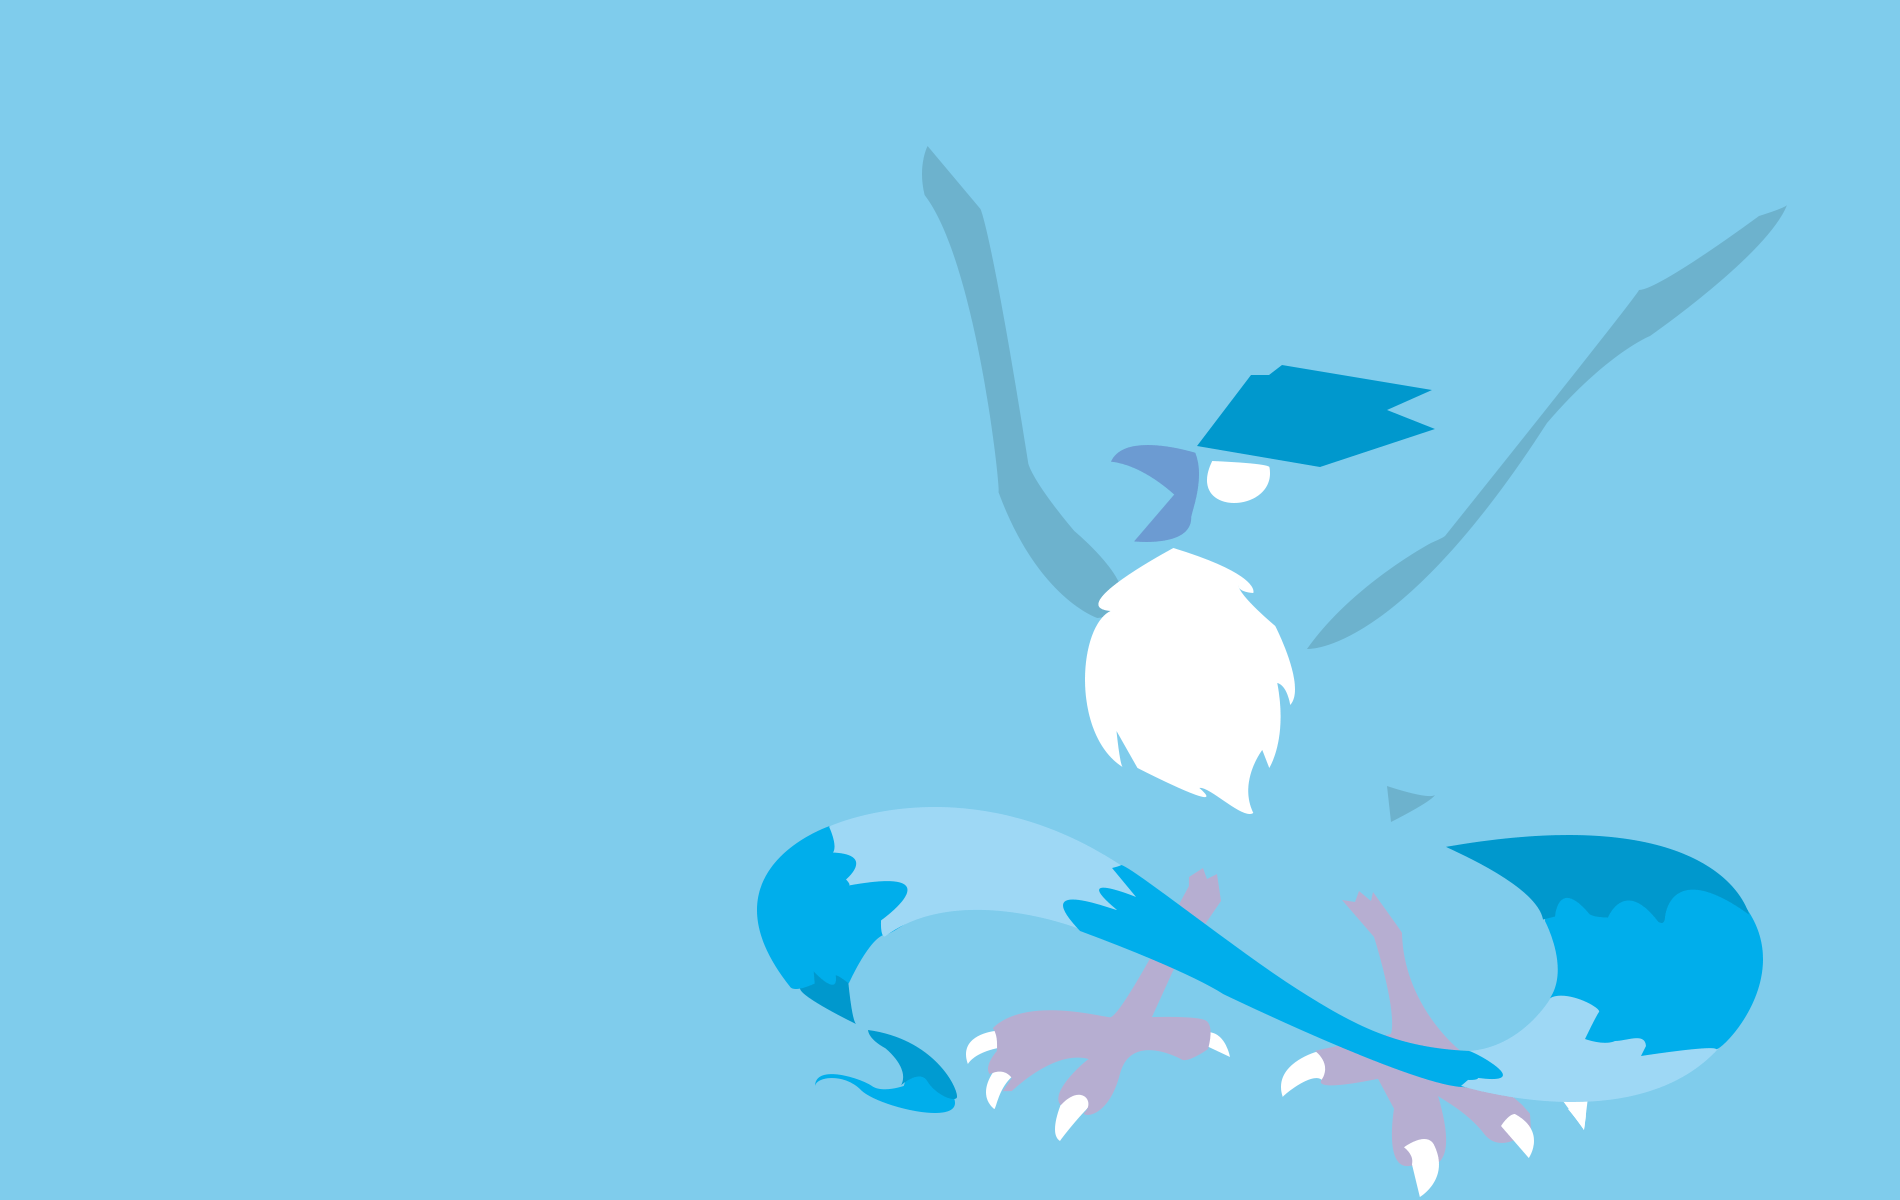 Free download articuno by poketrainermanro customization wallpapers.